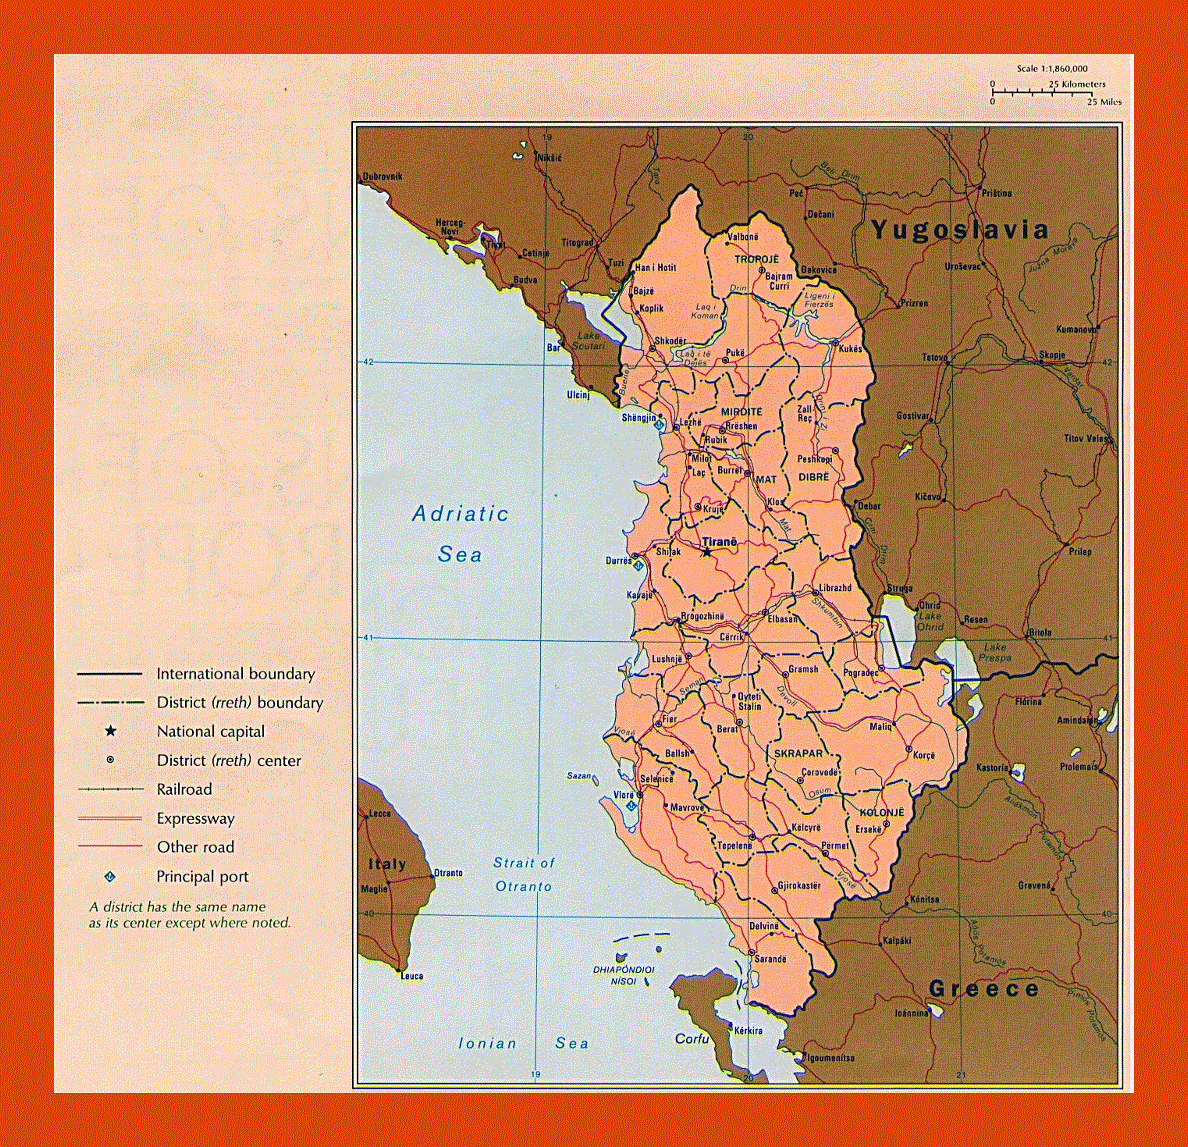 Political and administrative map of Albania